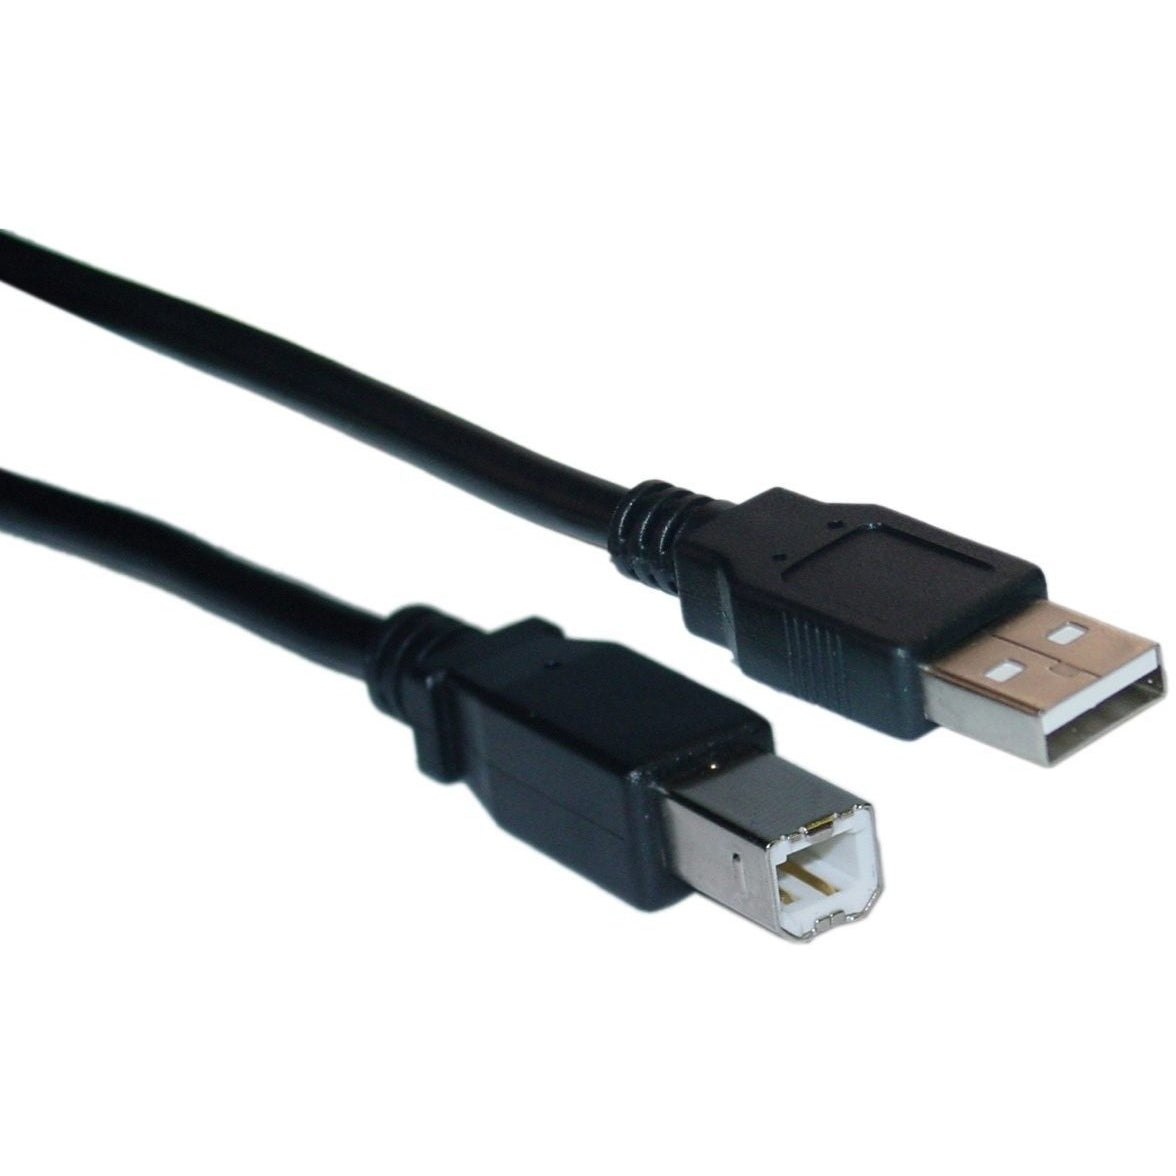 Hosa USB-106AB USB 2.0 Type A to Type B Cable, 6 Foot